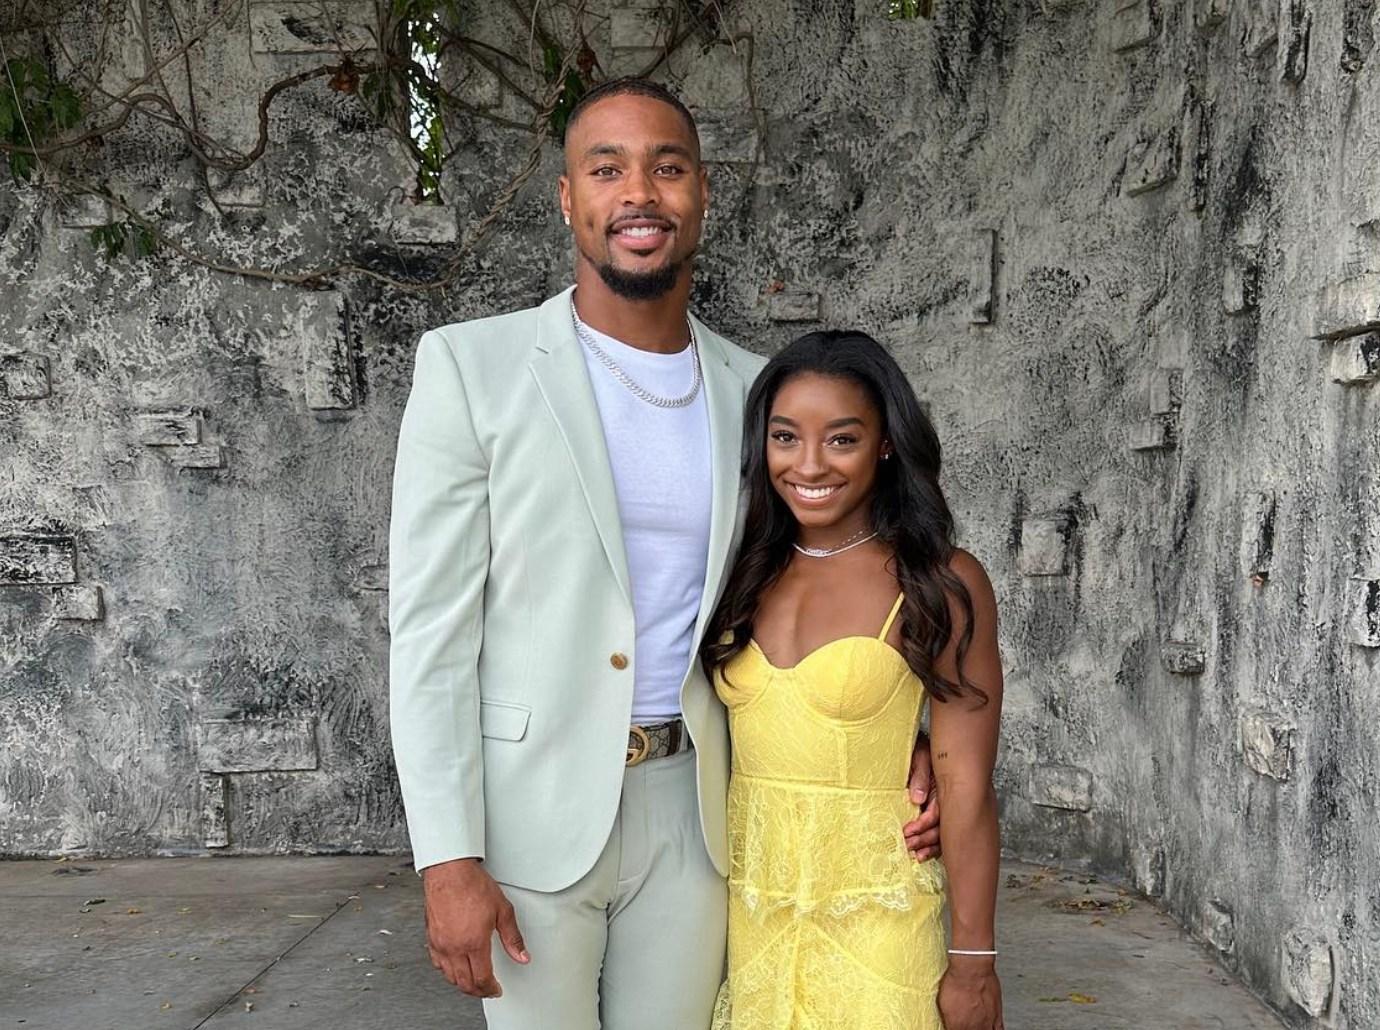 Simone Biles' Husband Gets Backlash After Saying He's the 'Catch